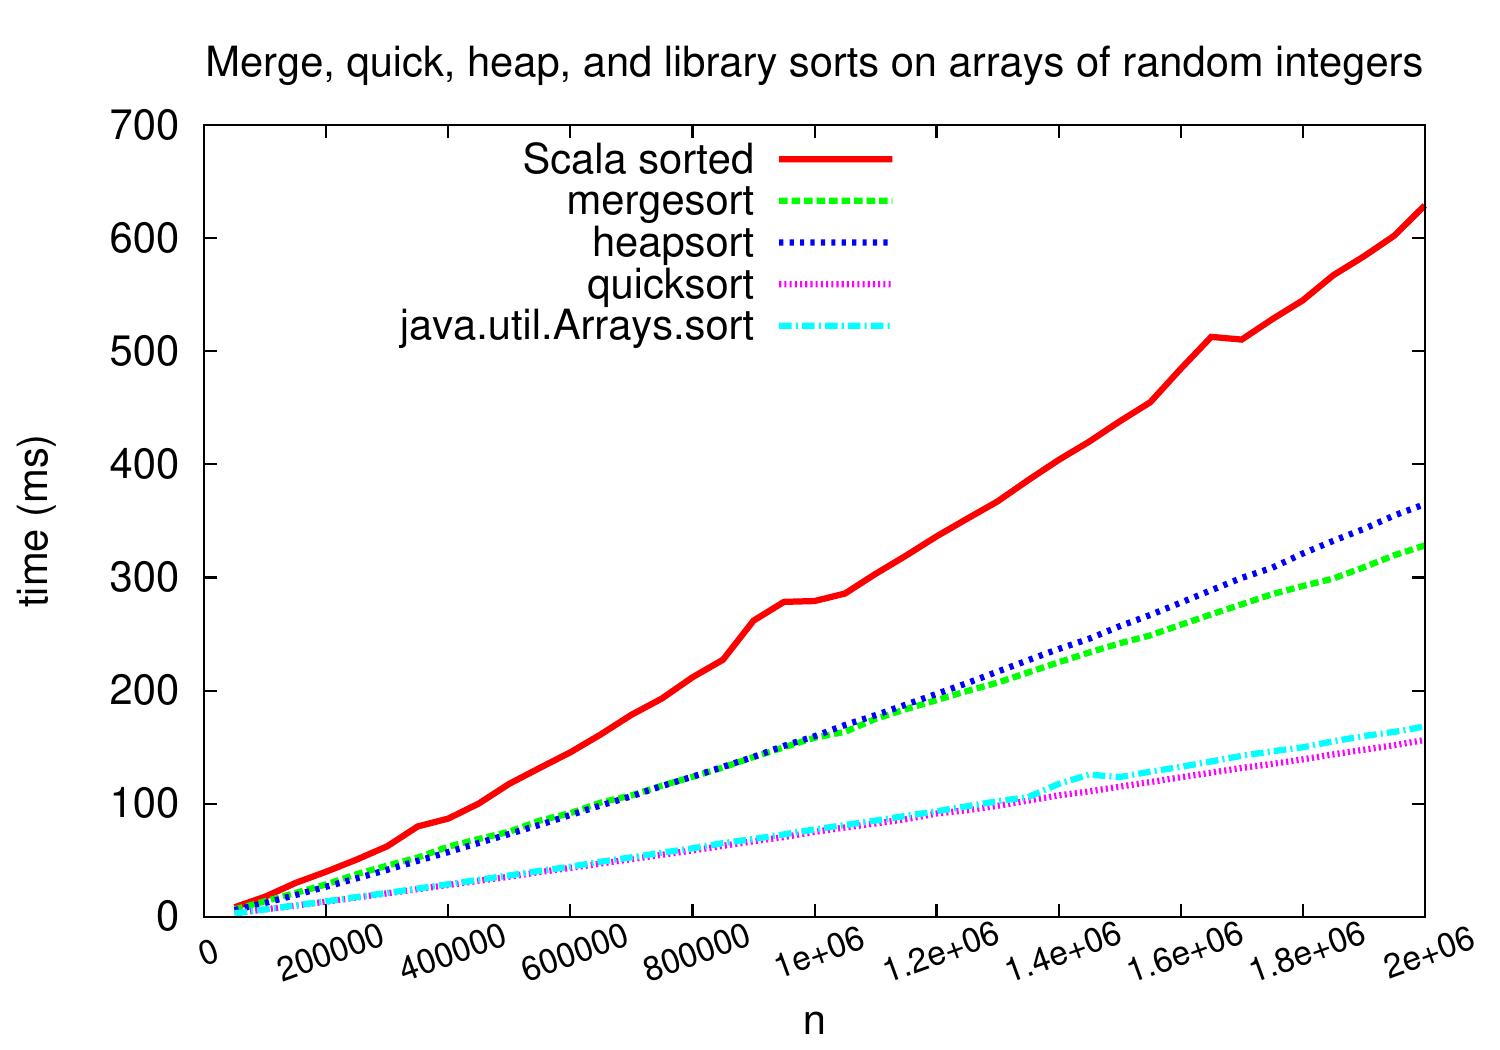 _images/benchmark-merge-quick-heap-library-ints-large.jpg